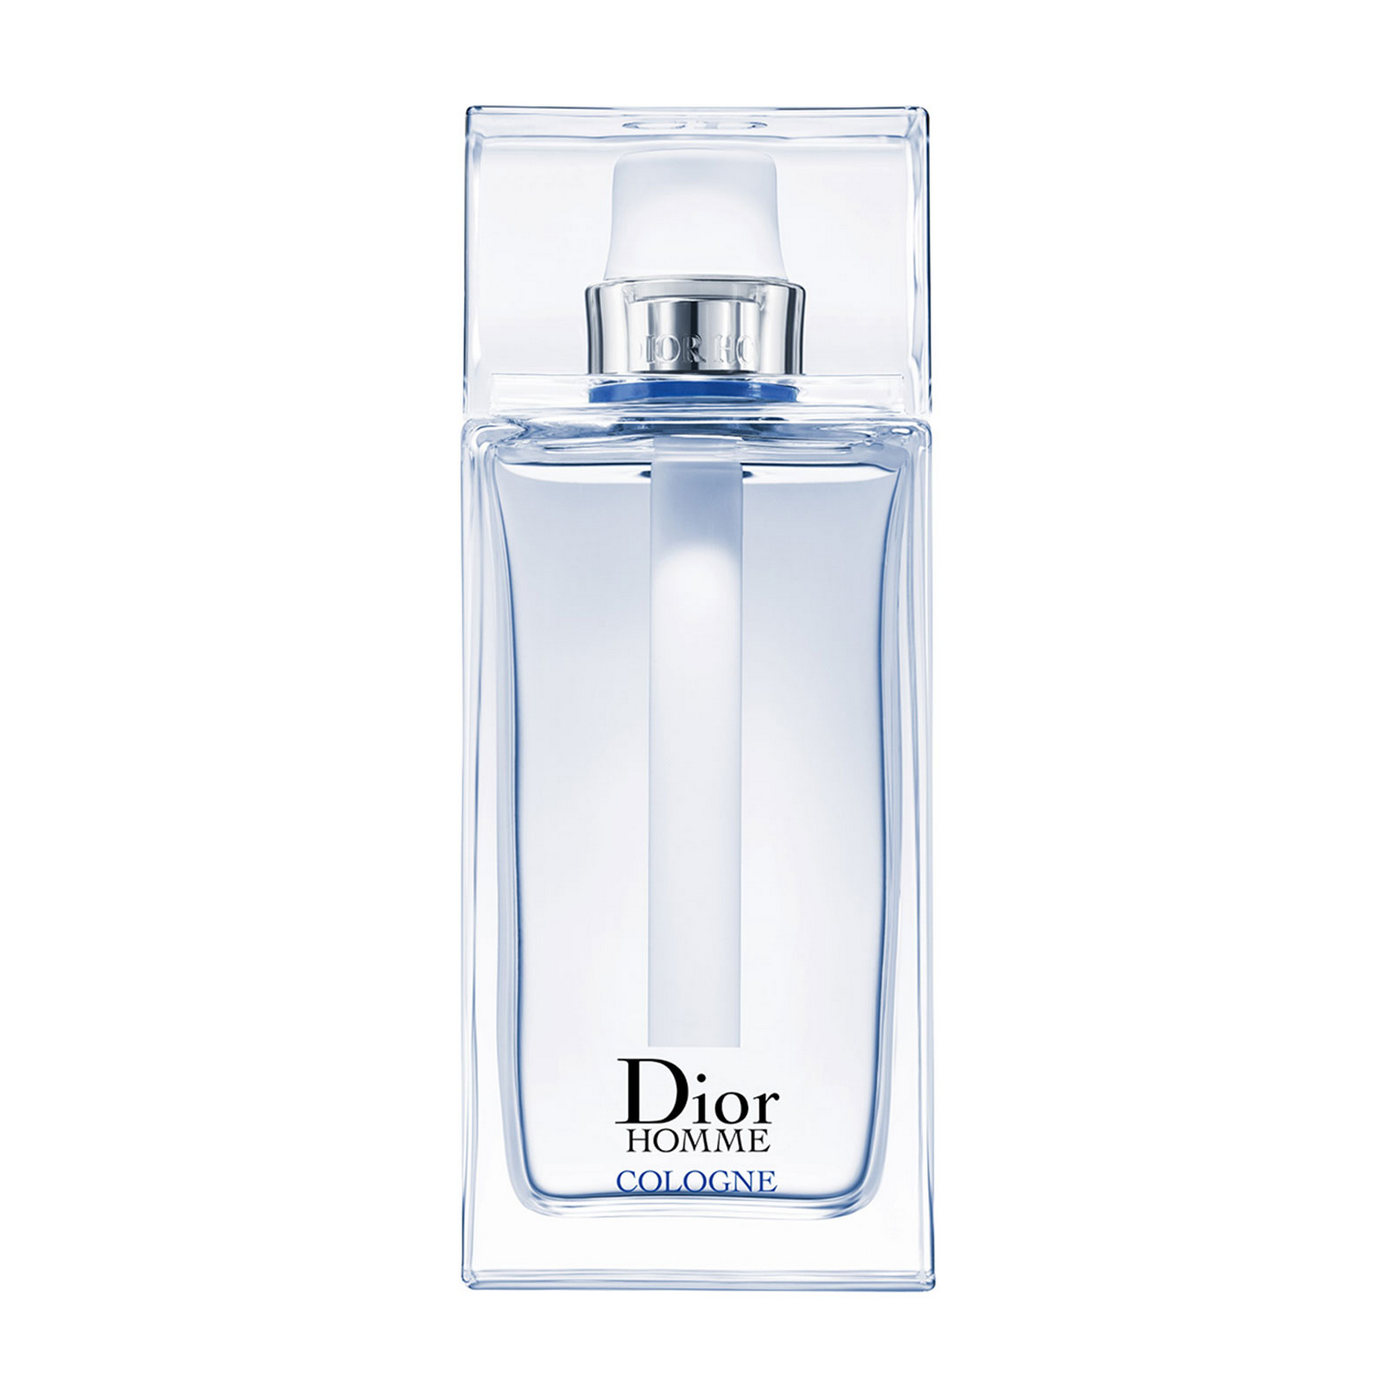 Chanel homme cologne. Christian Dior Dior homme Cologne. Одеколон Christian Dior homme Cologne.